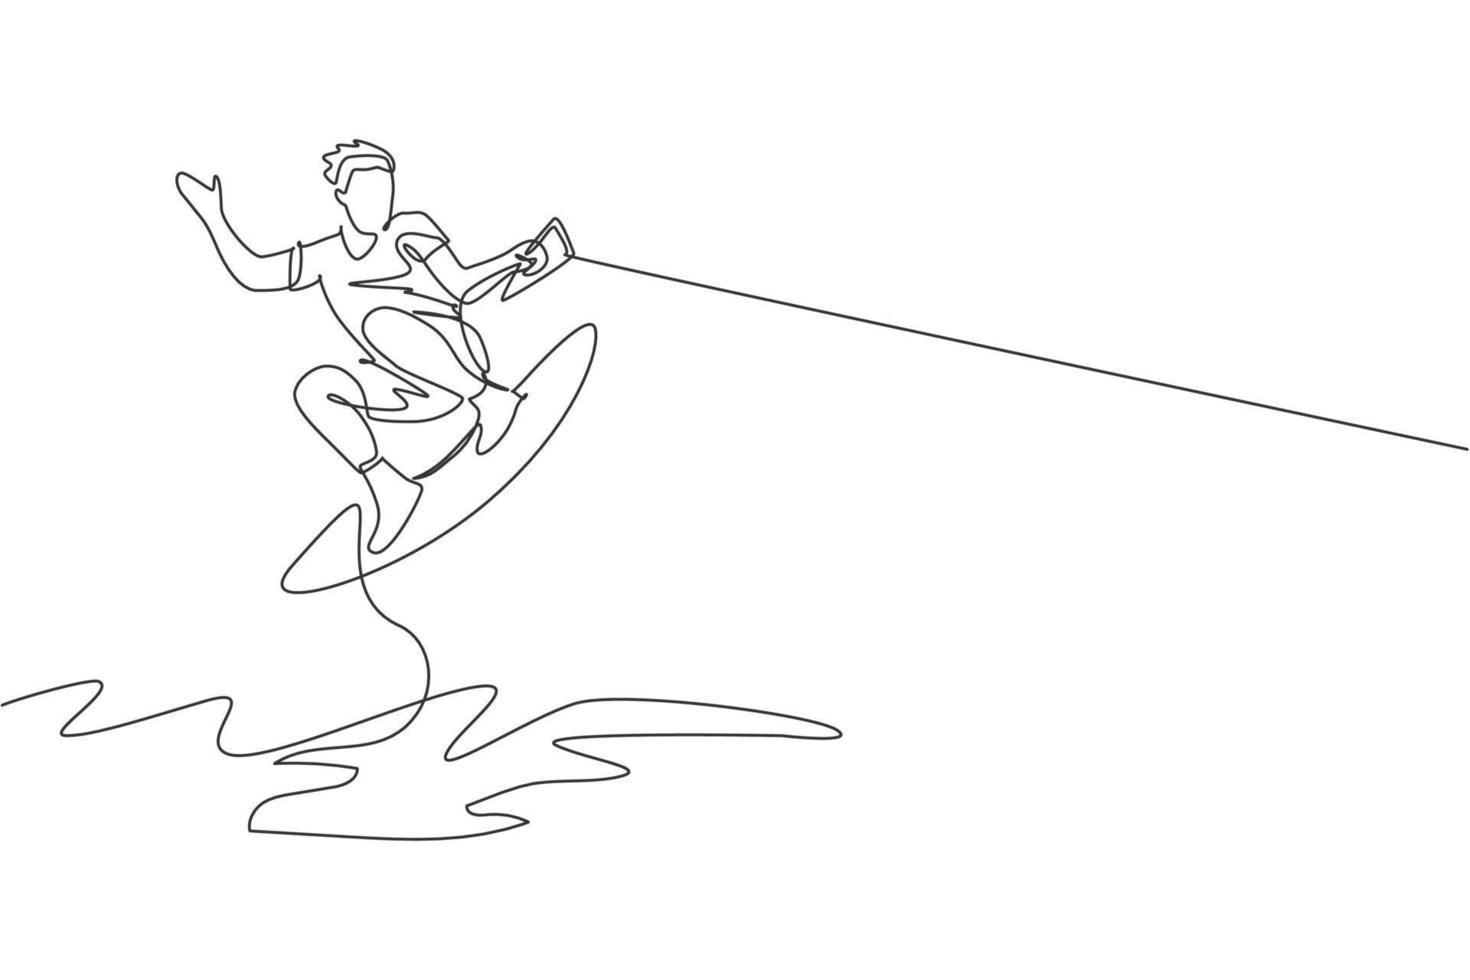 One single line drawing of young sporty man play wakeboarding in the sea beach vector illustration. Healthy lifestyle and extreme sport concept. Summer vacation. Modern continuous line draw design